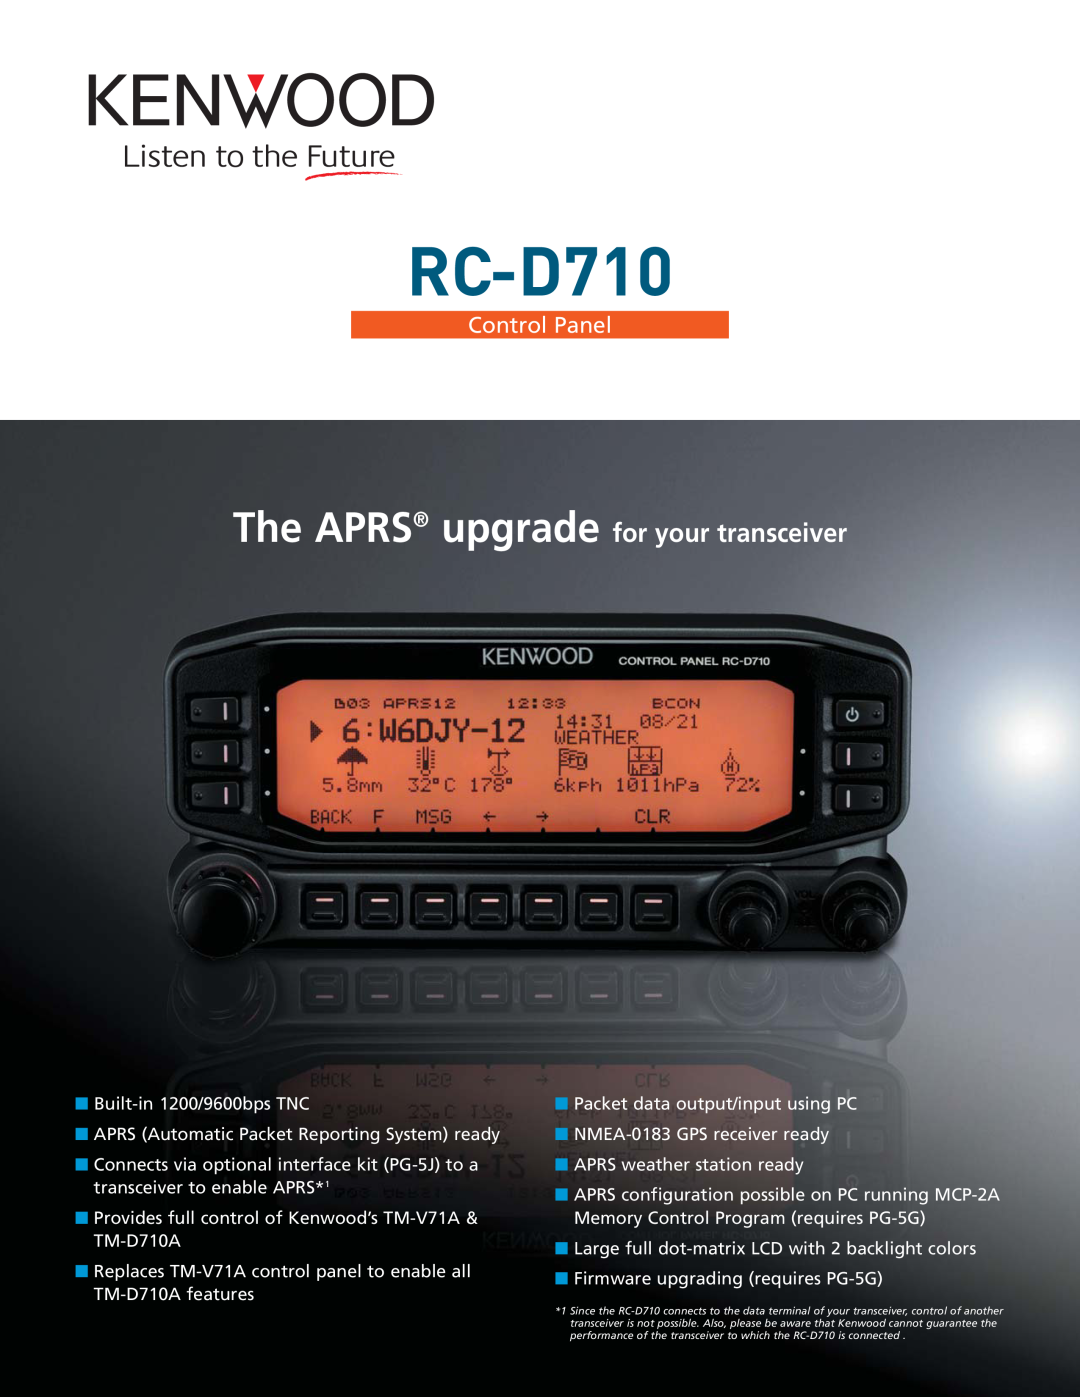 Kenwood RC-D710 manual The APRS upgrade for your transceiver, Control Panel 